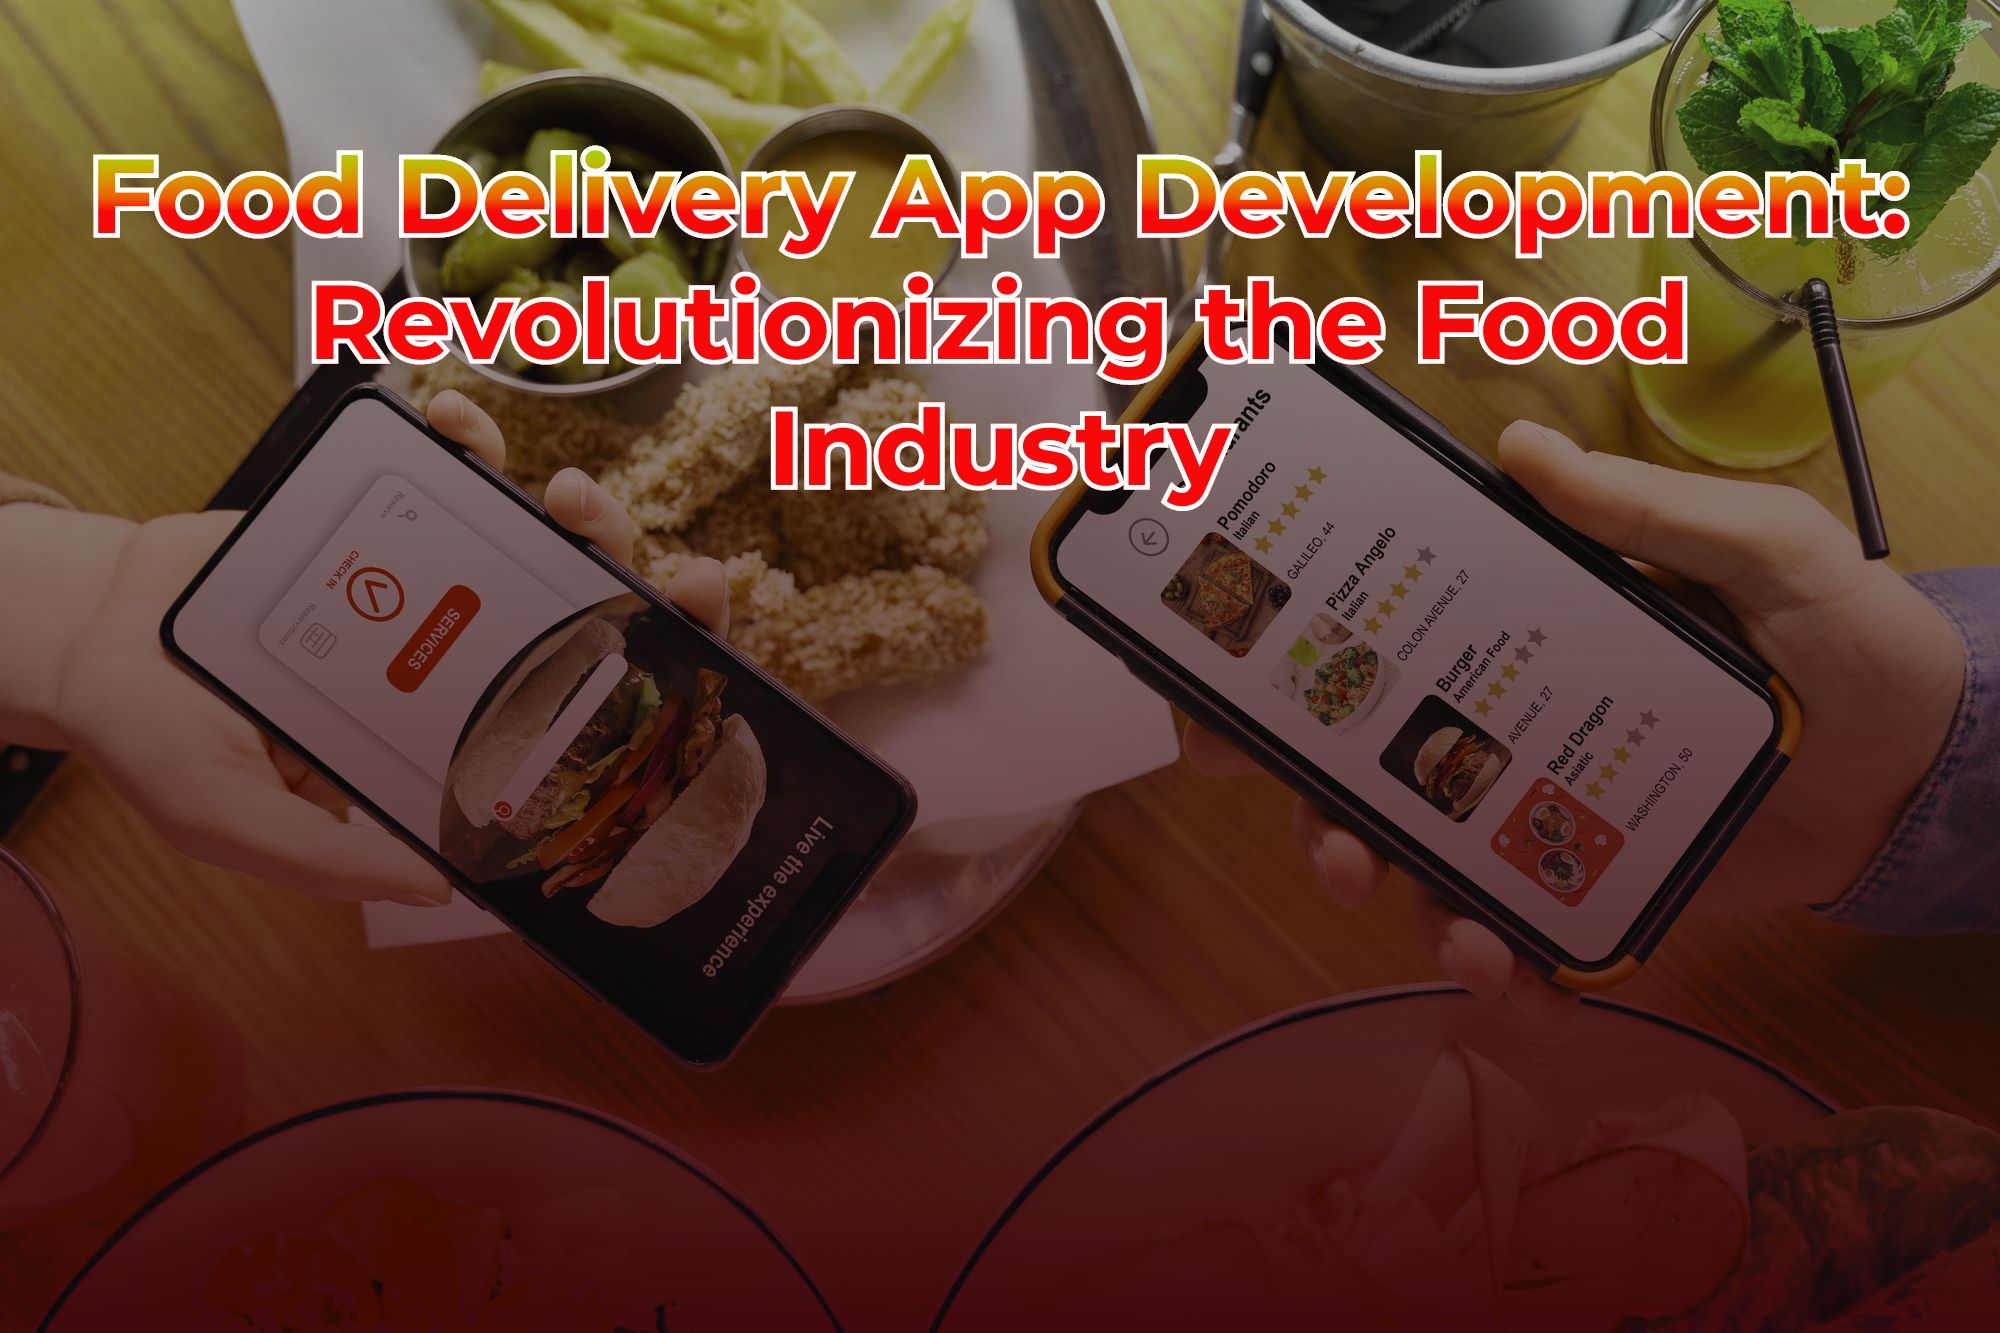 Food Delivery App Development: Revolutionizing the Food Industry